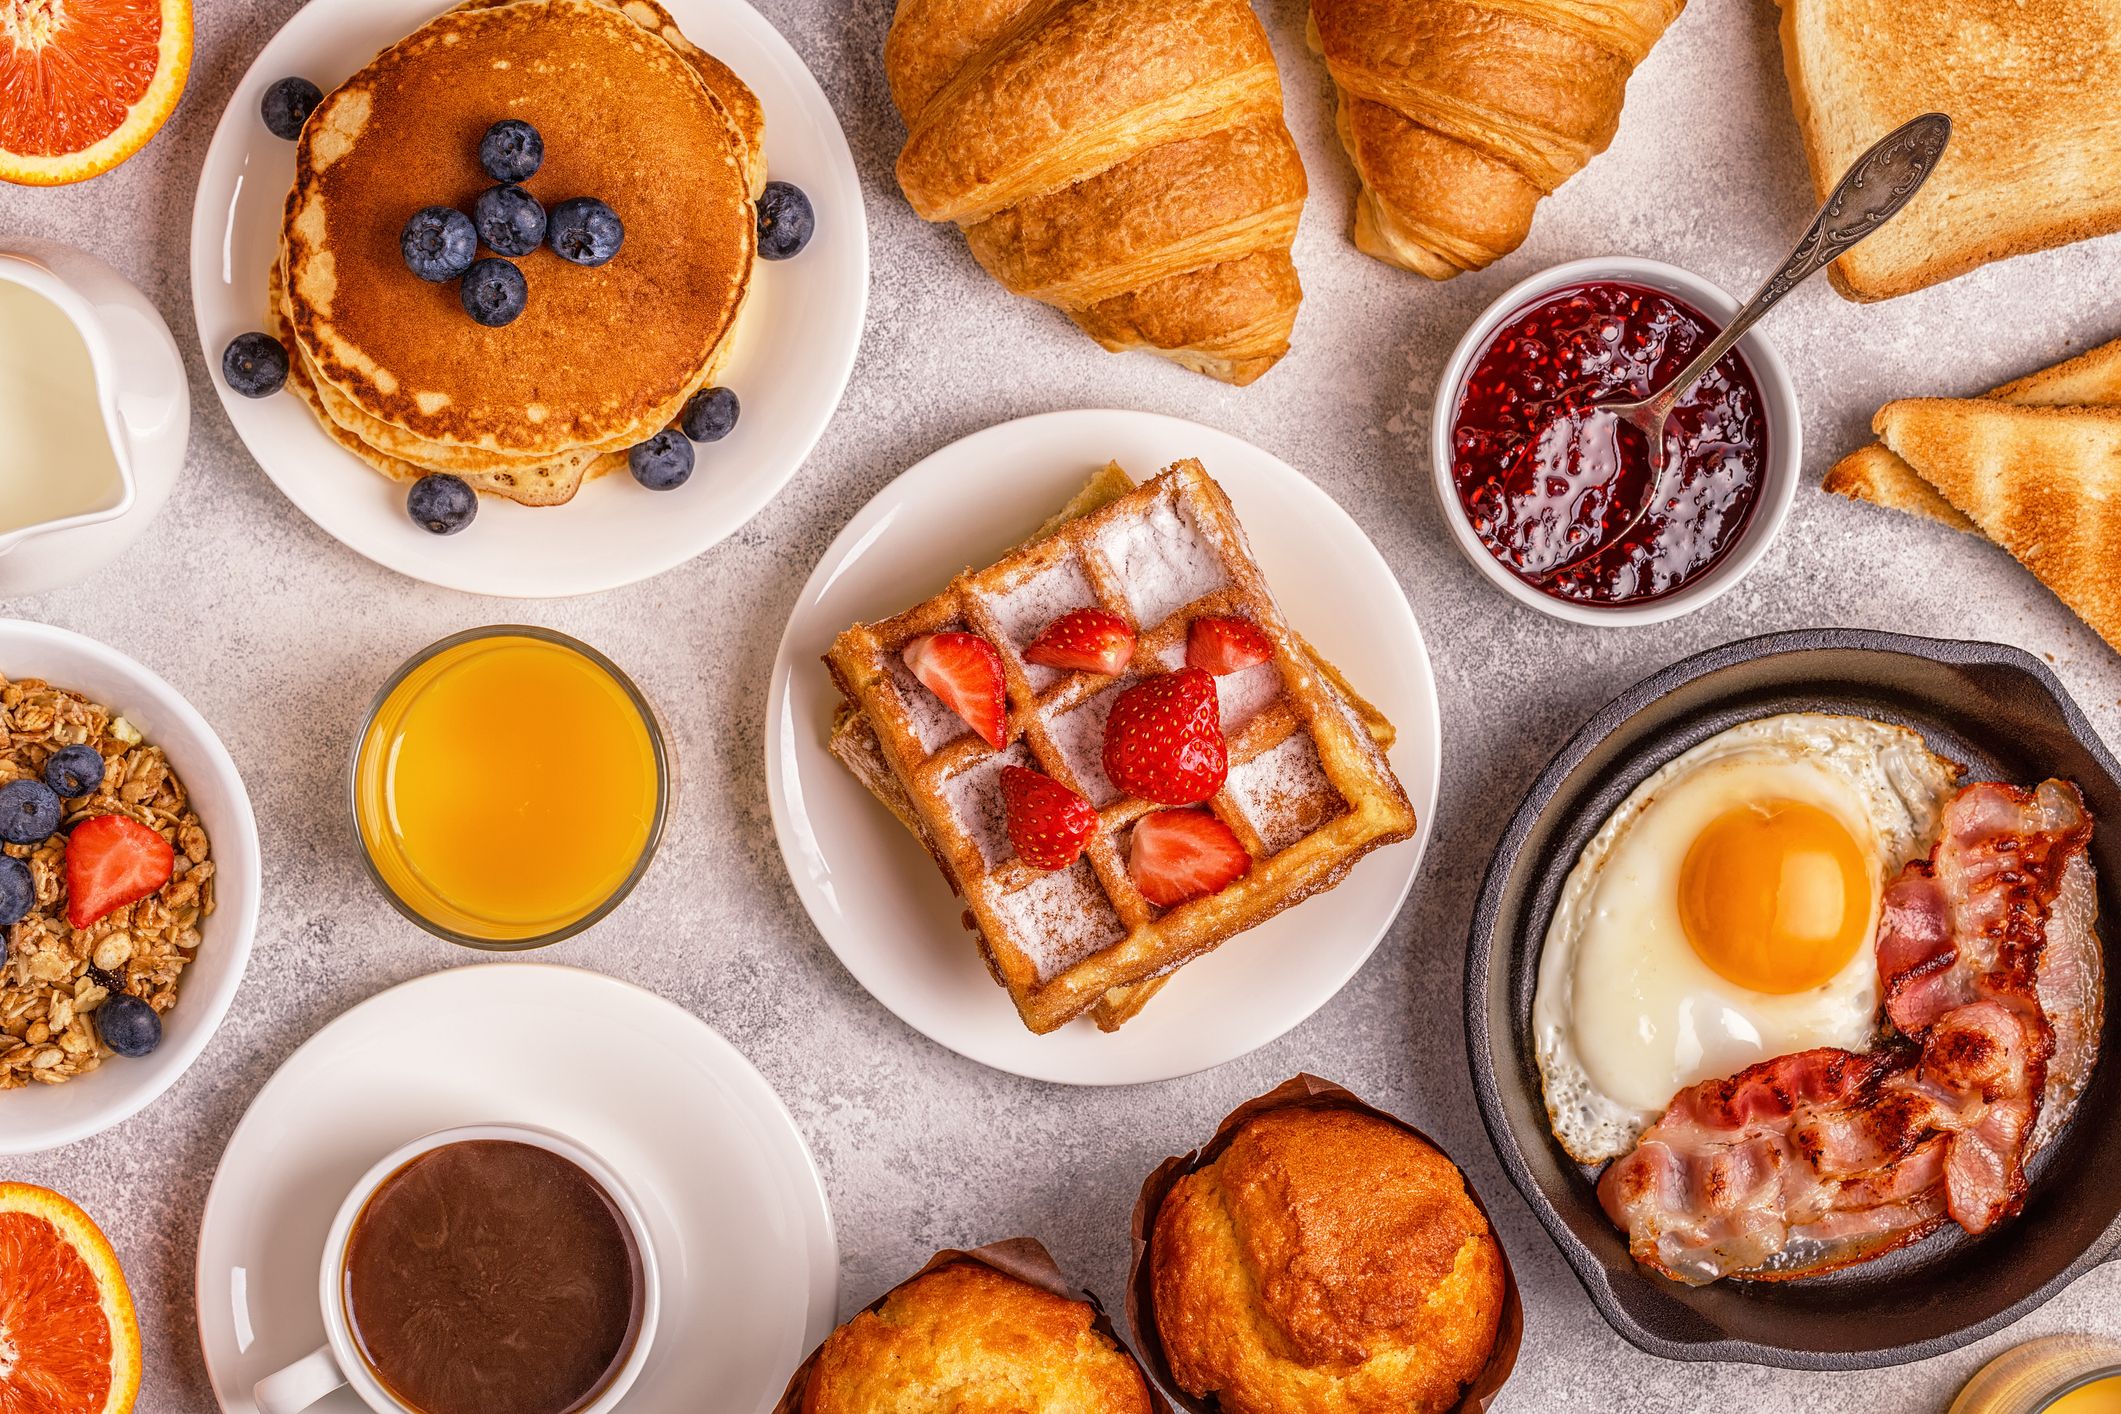 Eating Breakfast may Help you Maintain a Healthier Weight